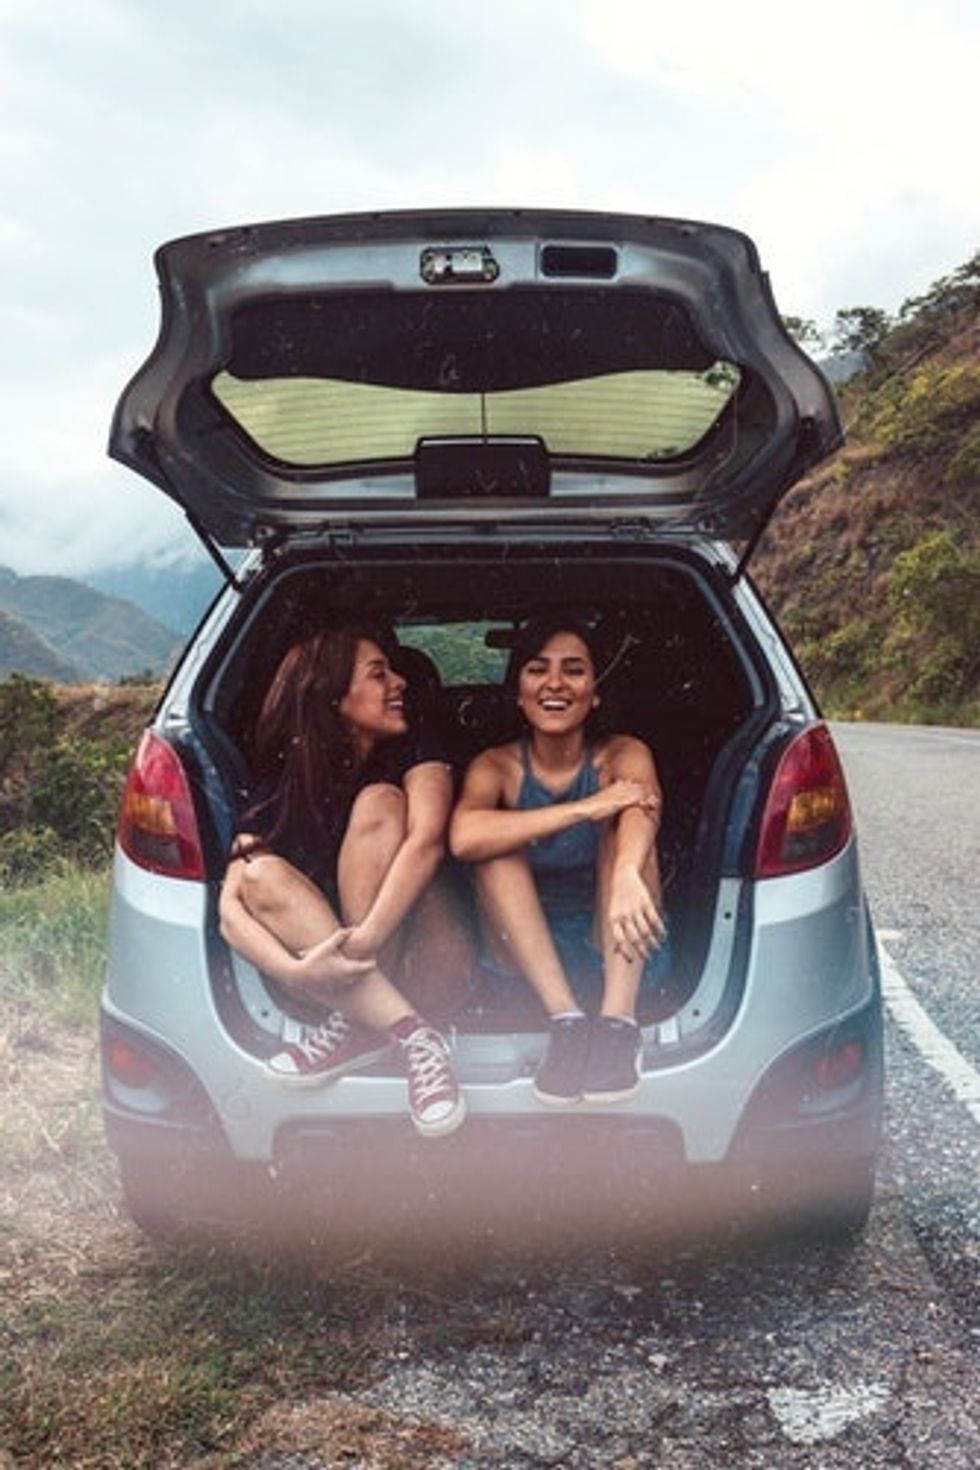 9 Things To Bring On An Impromptu Summer Road Trip